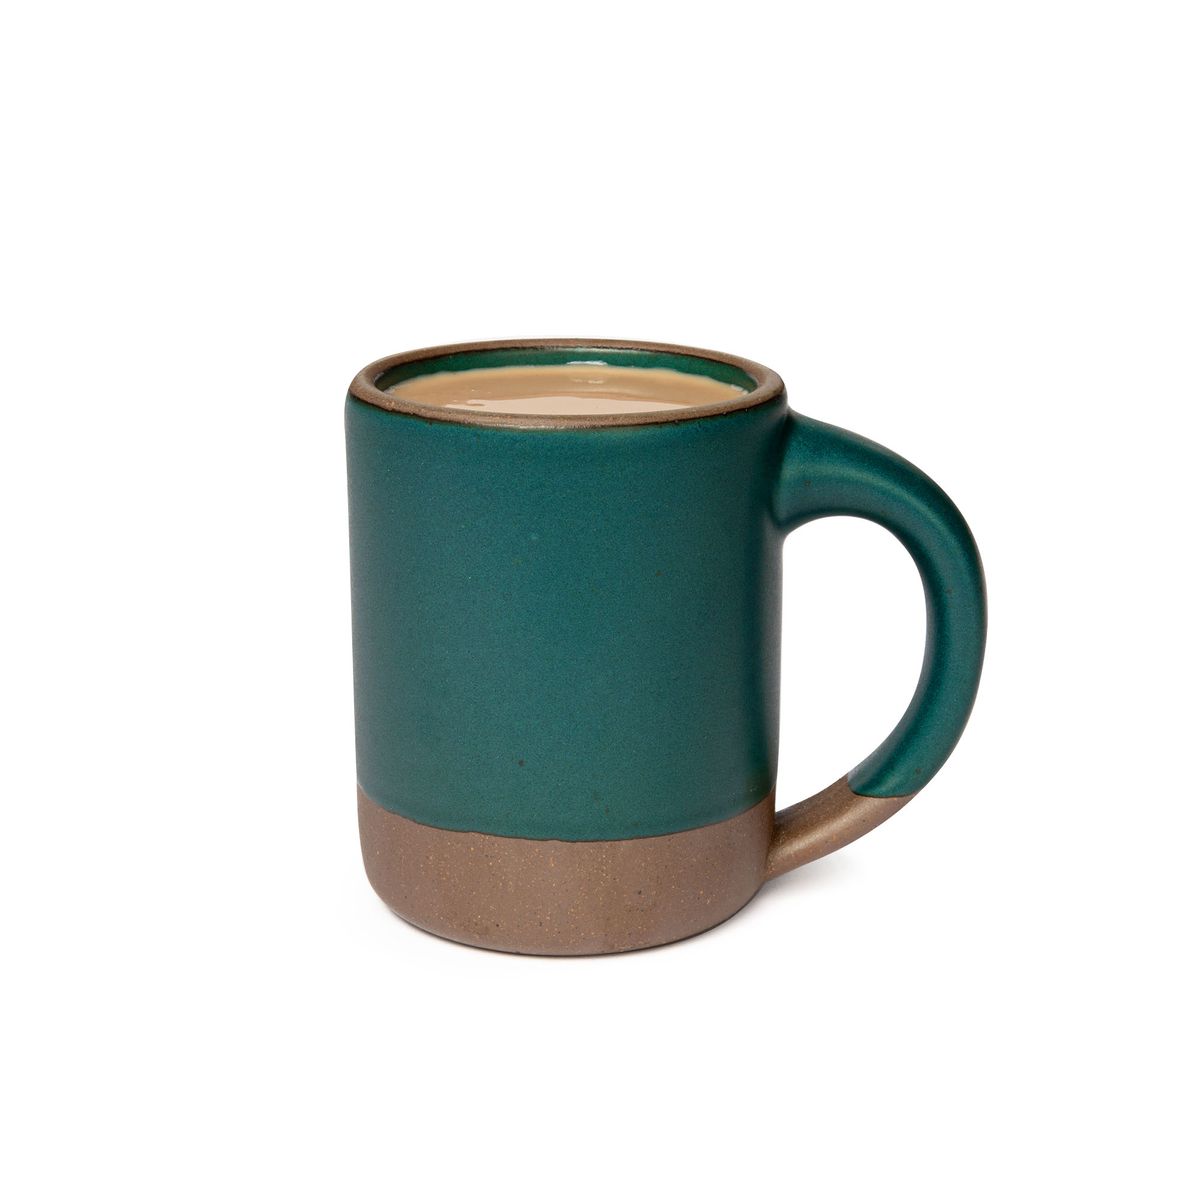 A big sized ceramic mug with handle in a deep, dark teal color featuring iron speckles and unglazed rim and bottom base. The mug has coffee inside.